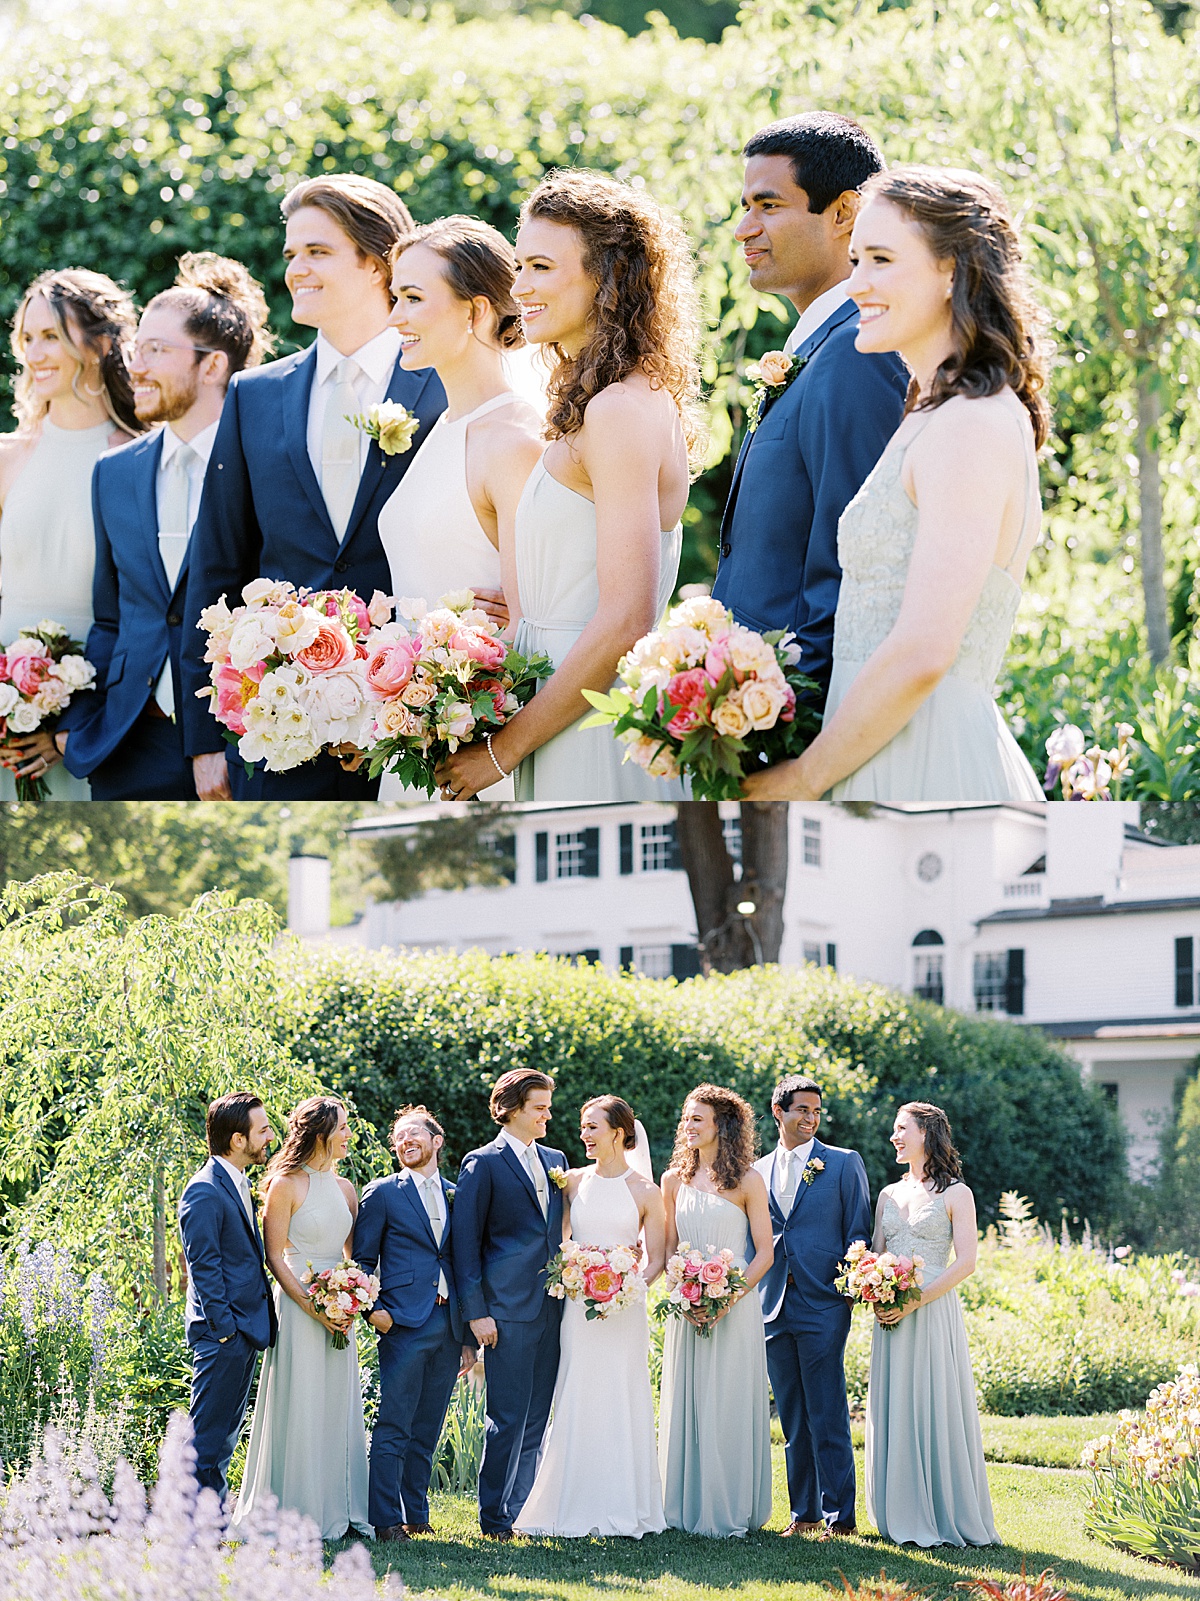 wedding party in blue suits and pale green dresses pose in garden before ceremony shot by Massachusetts wedding photographer